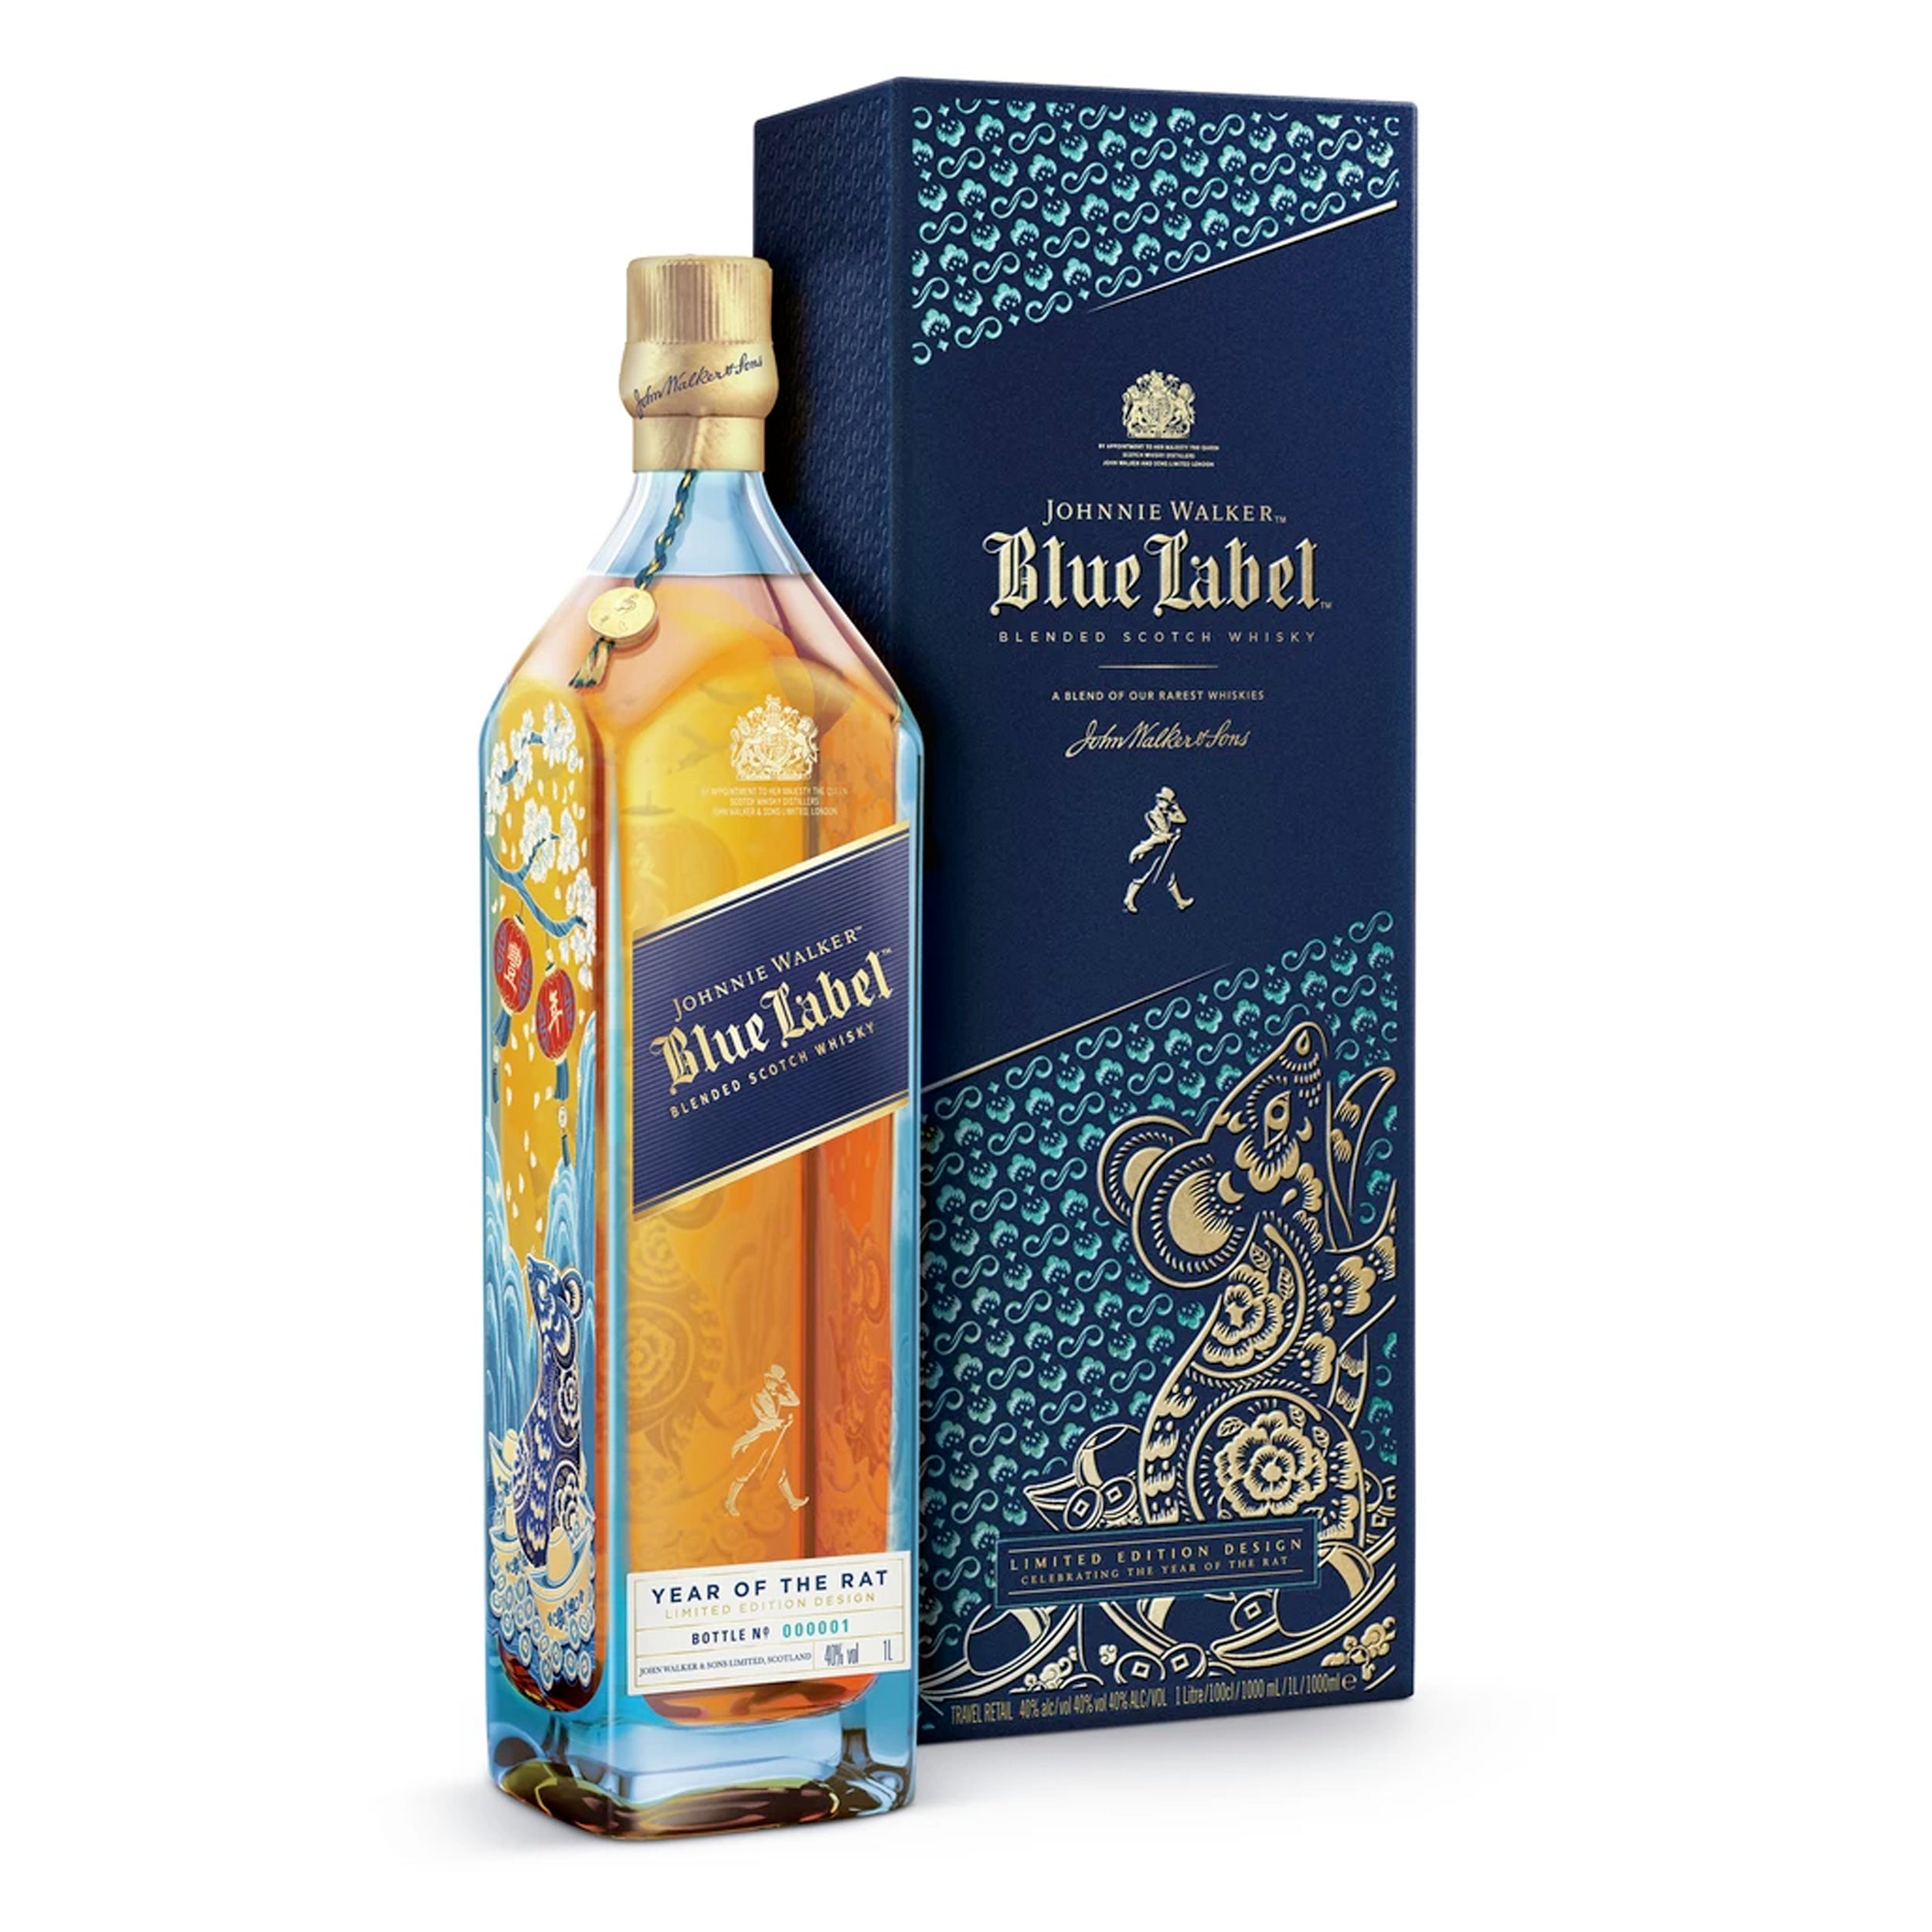 JOHNNIE WALKER BLUE LABEL YEAR OF THE RAT LIMITED EDITION